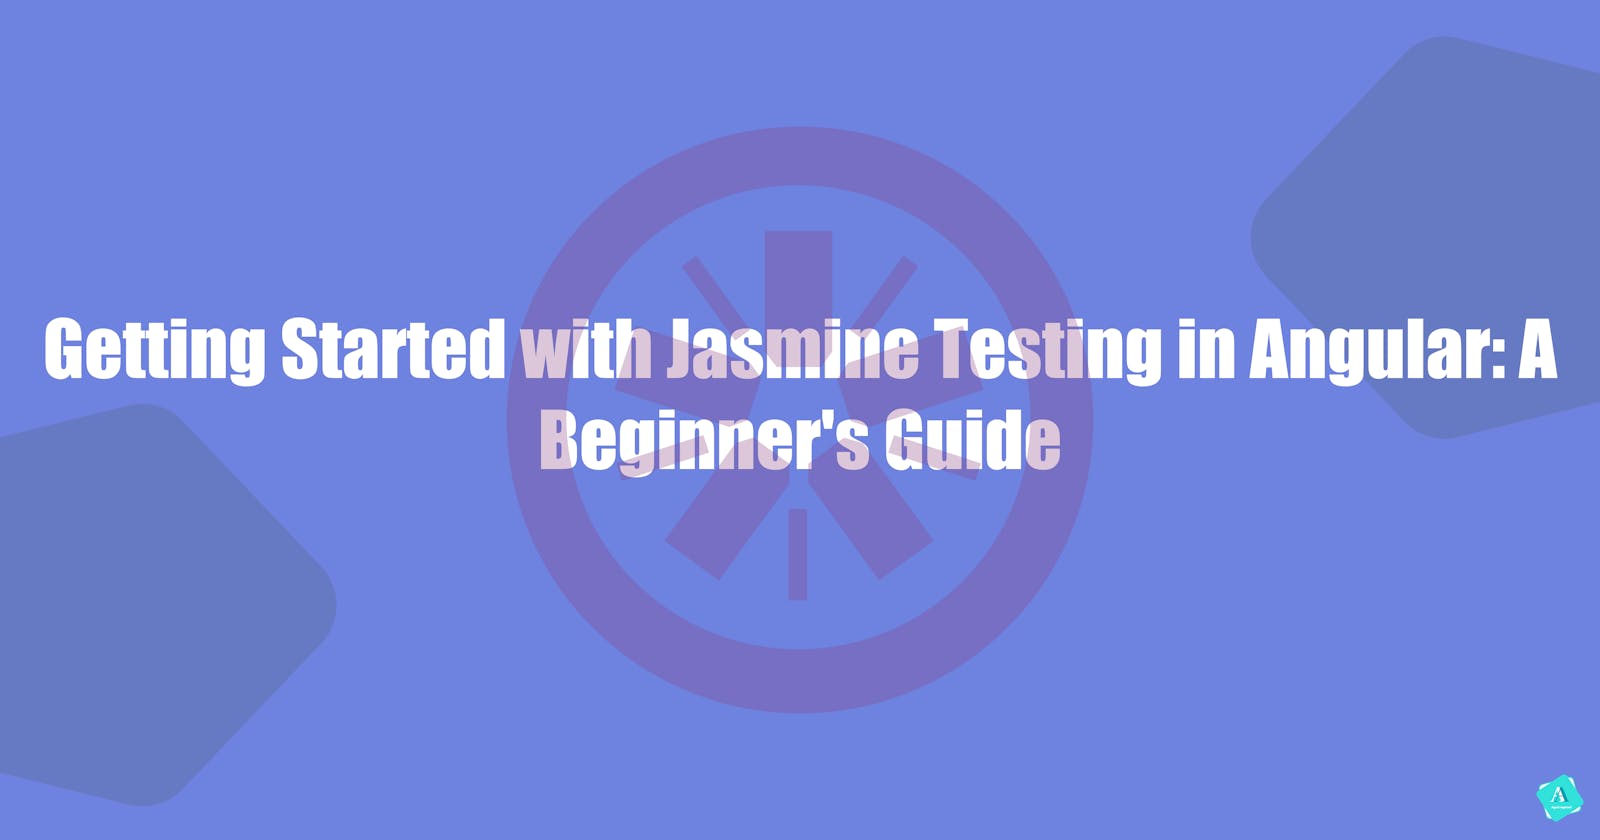 Getting Started with Jasmine Testing in Angular: A Beginner's Guide